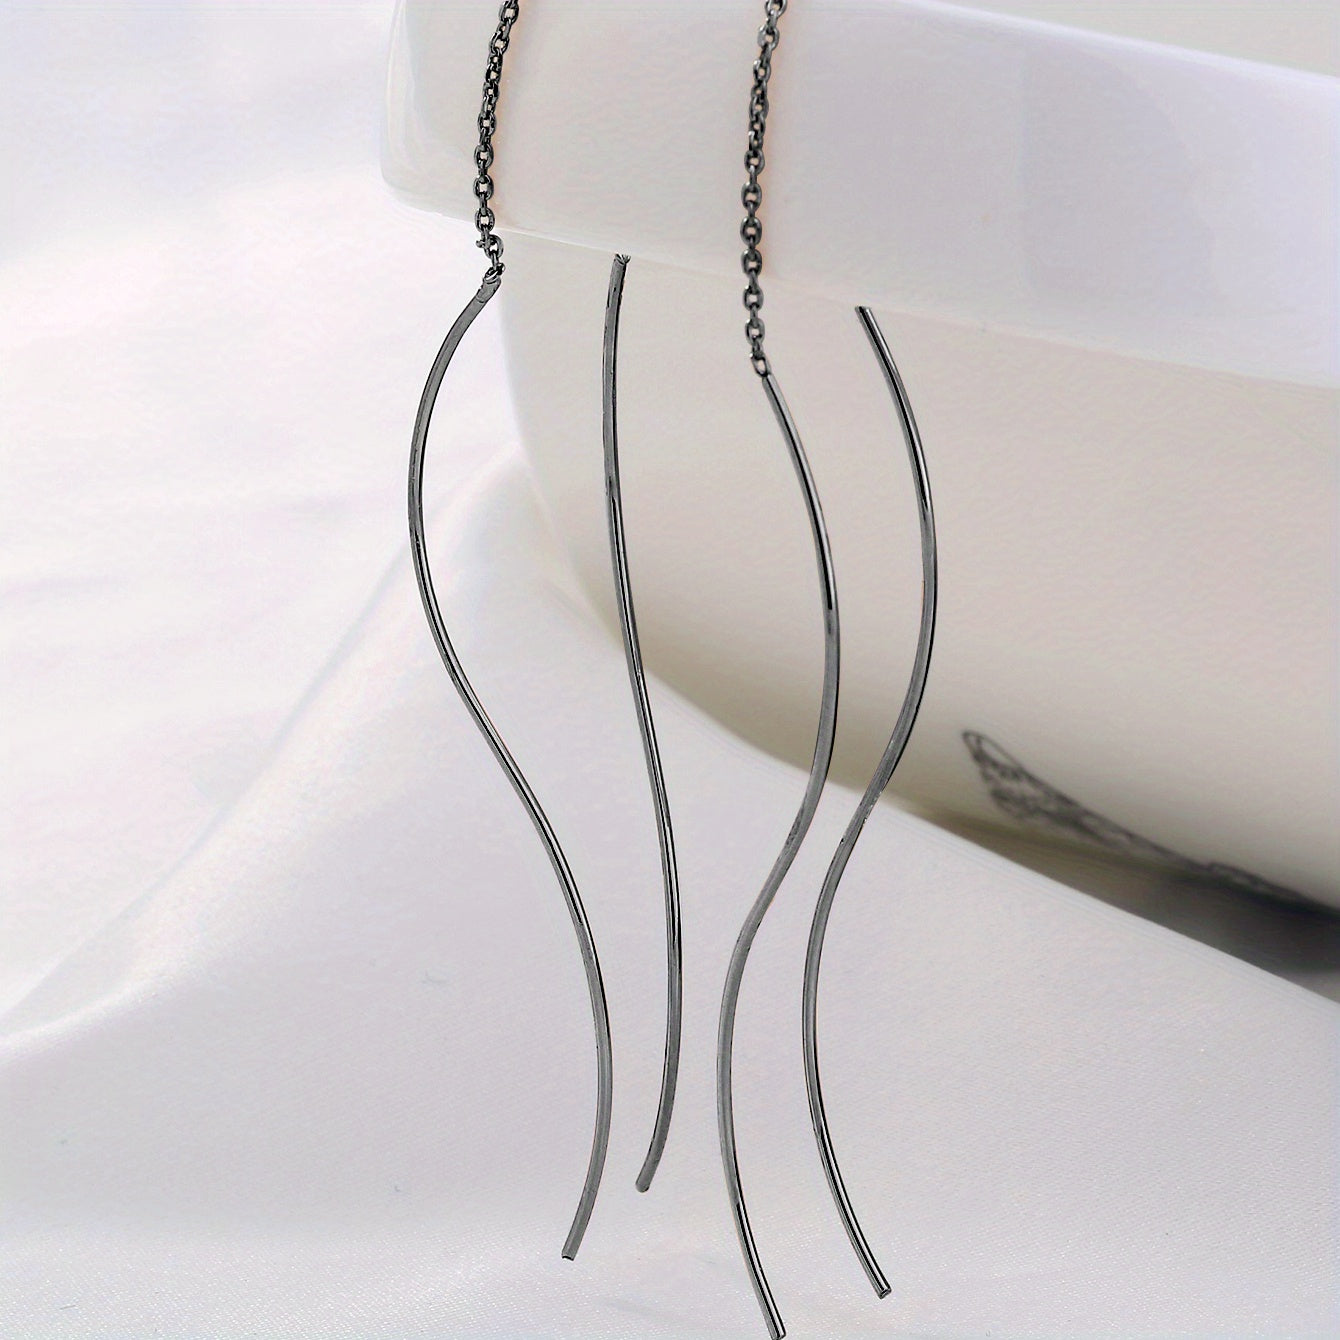 Elevate Your Style with our Elegant Long Tassel Threader Earrings - Wave Shaped Design